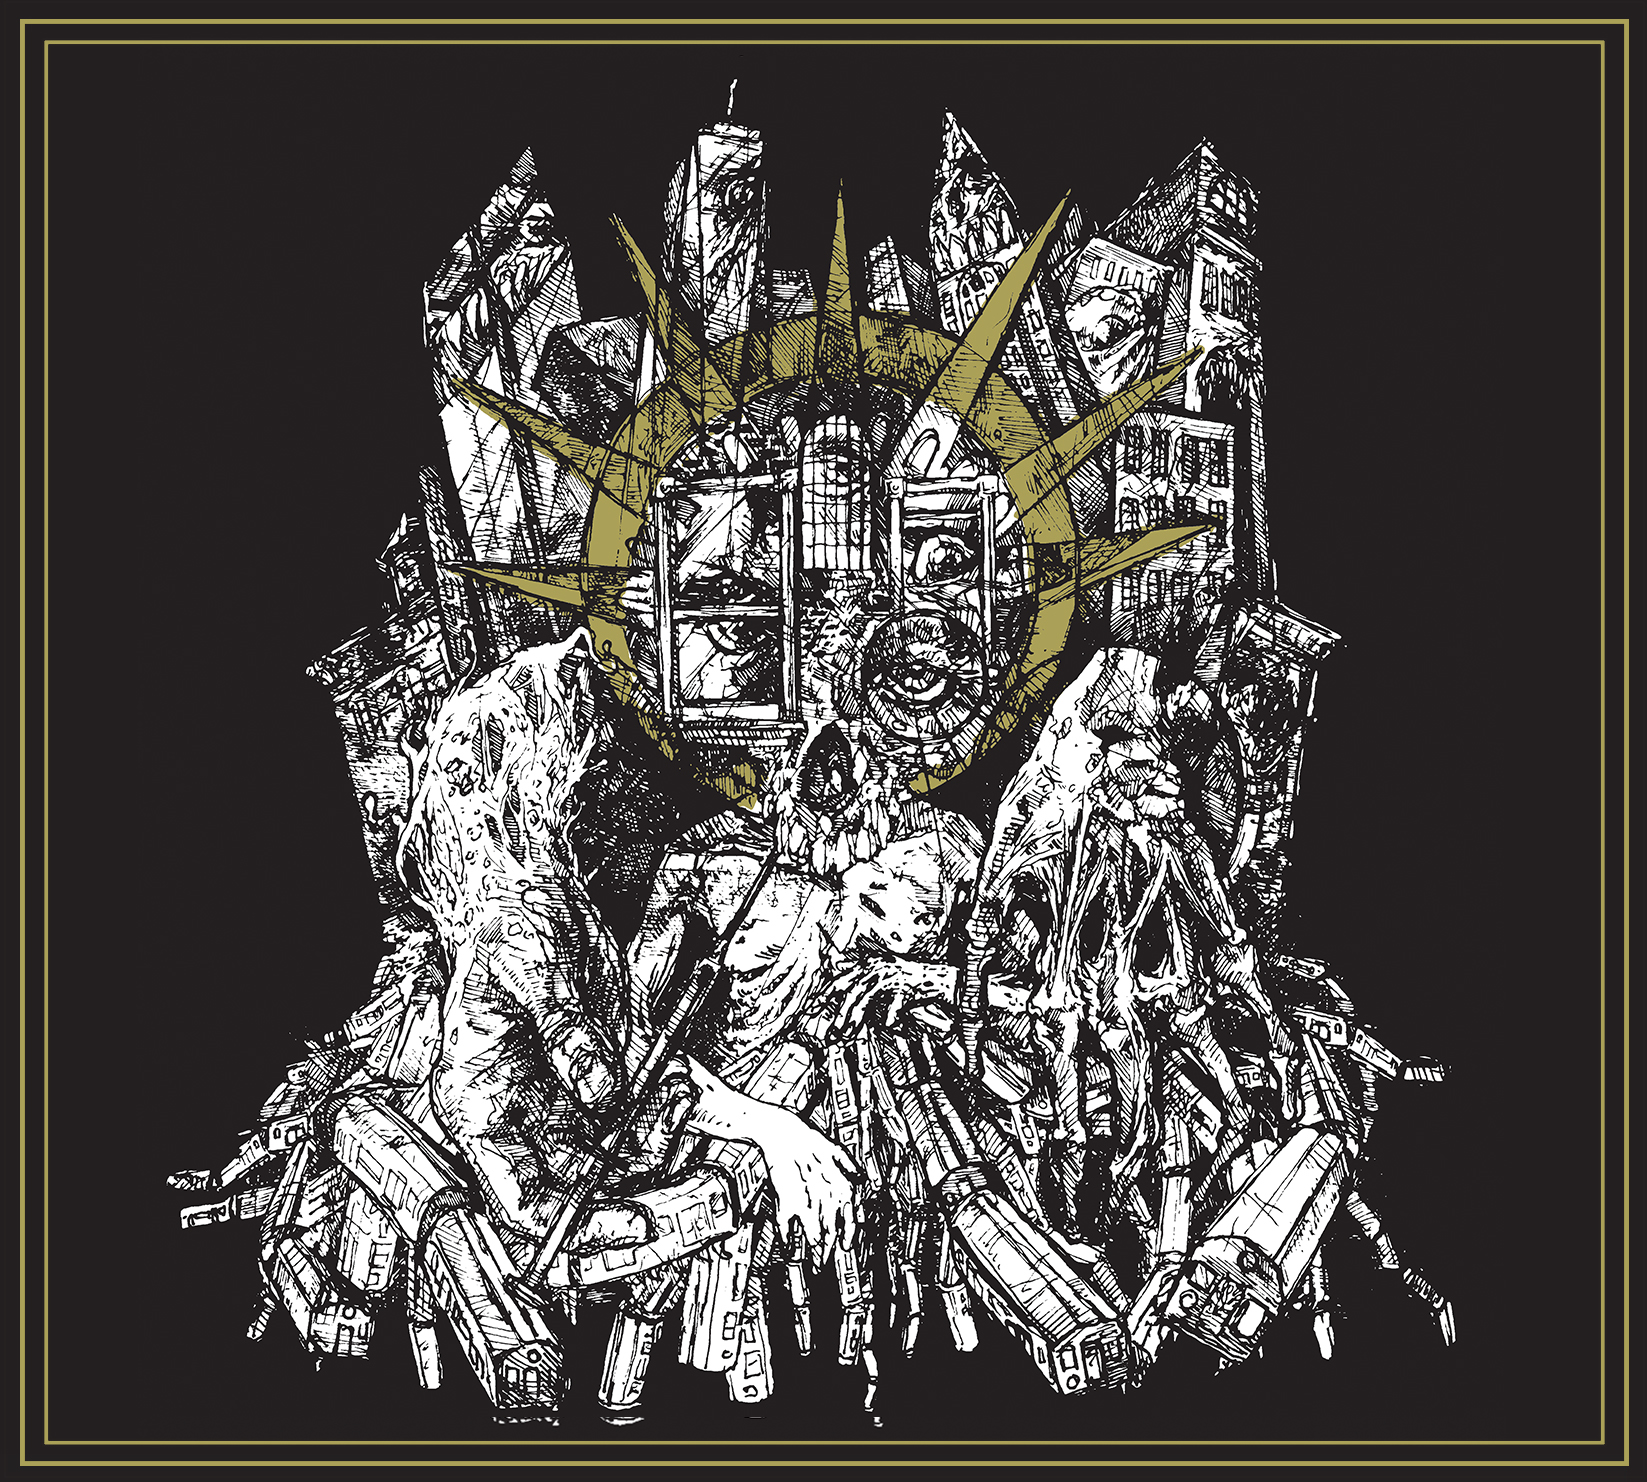 Imperial Triumphant Abyssal Gods cover final .jpg